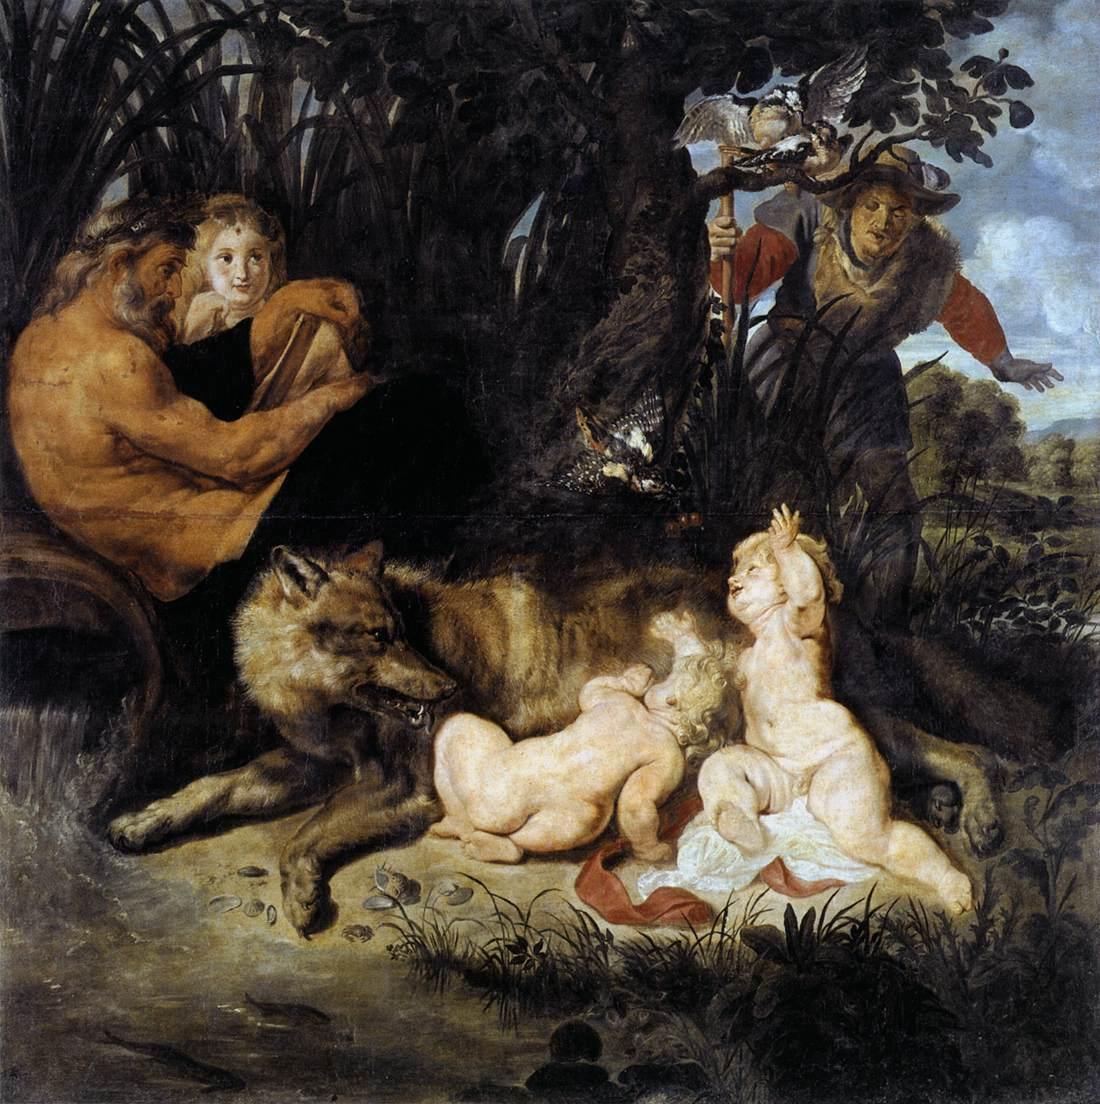 romulus-and-remus-by-peter-paul-rubens-c-1616.